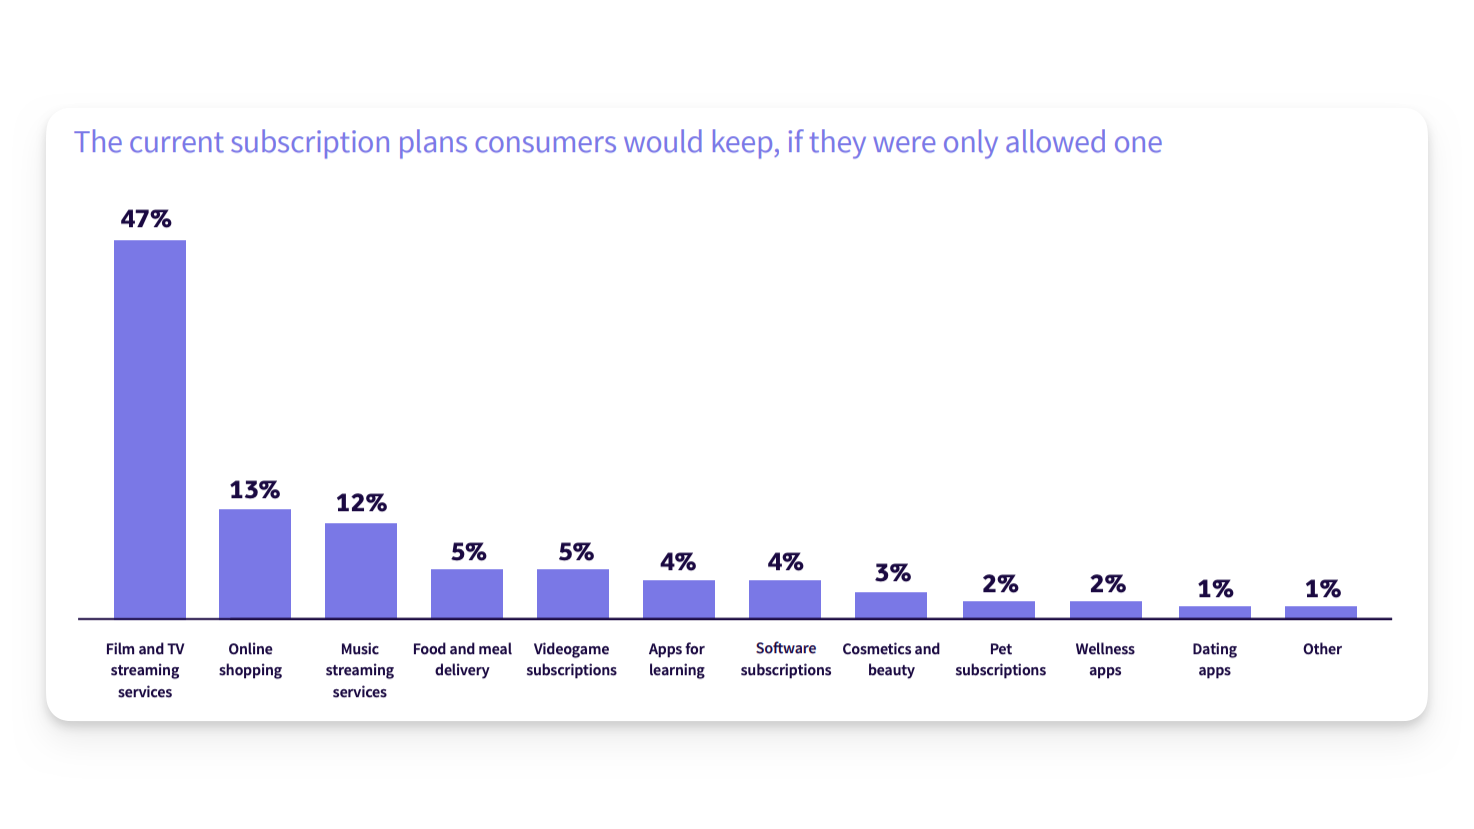 Bar graph showing subscription plans consumers would keep if they have to keep one